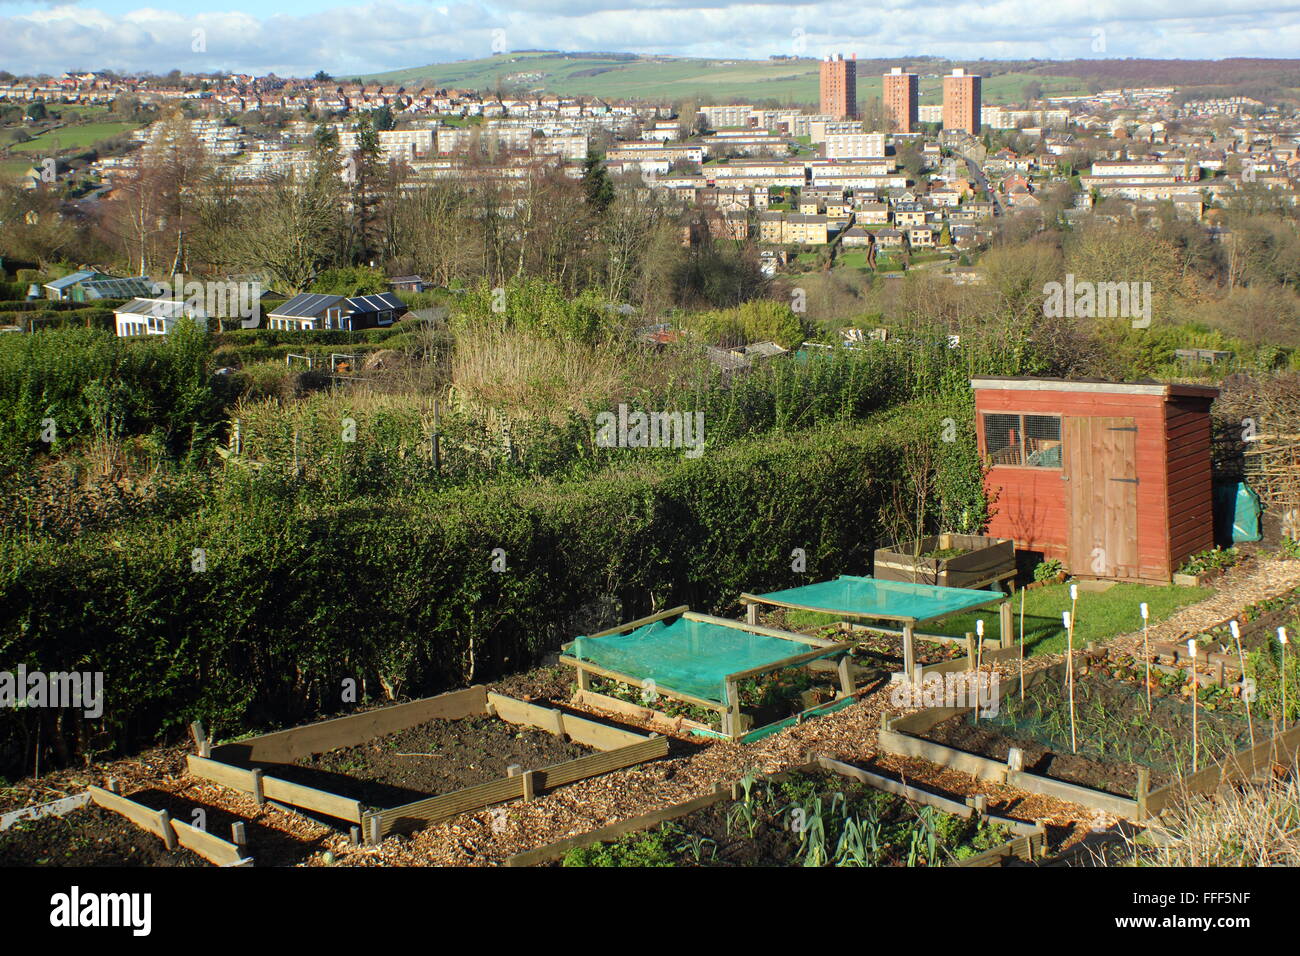 Hagg Lane Allotments in Sheffield, South Yorkshire looking to the city's rural fringe, England UK Stock Photo